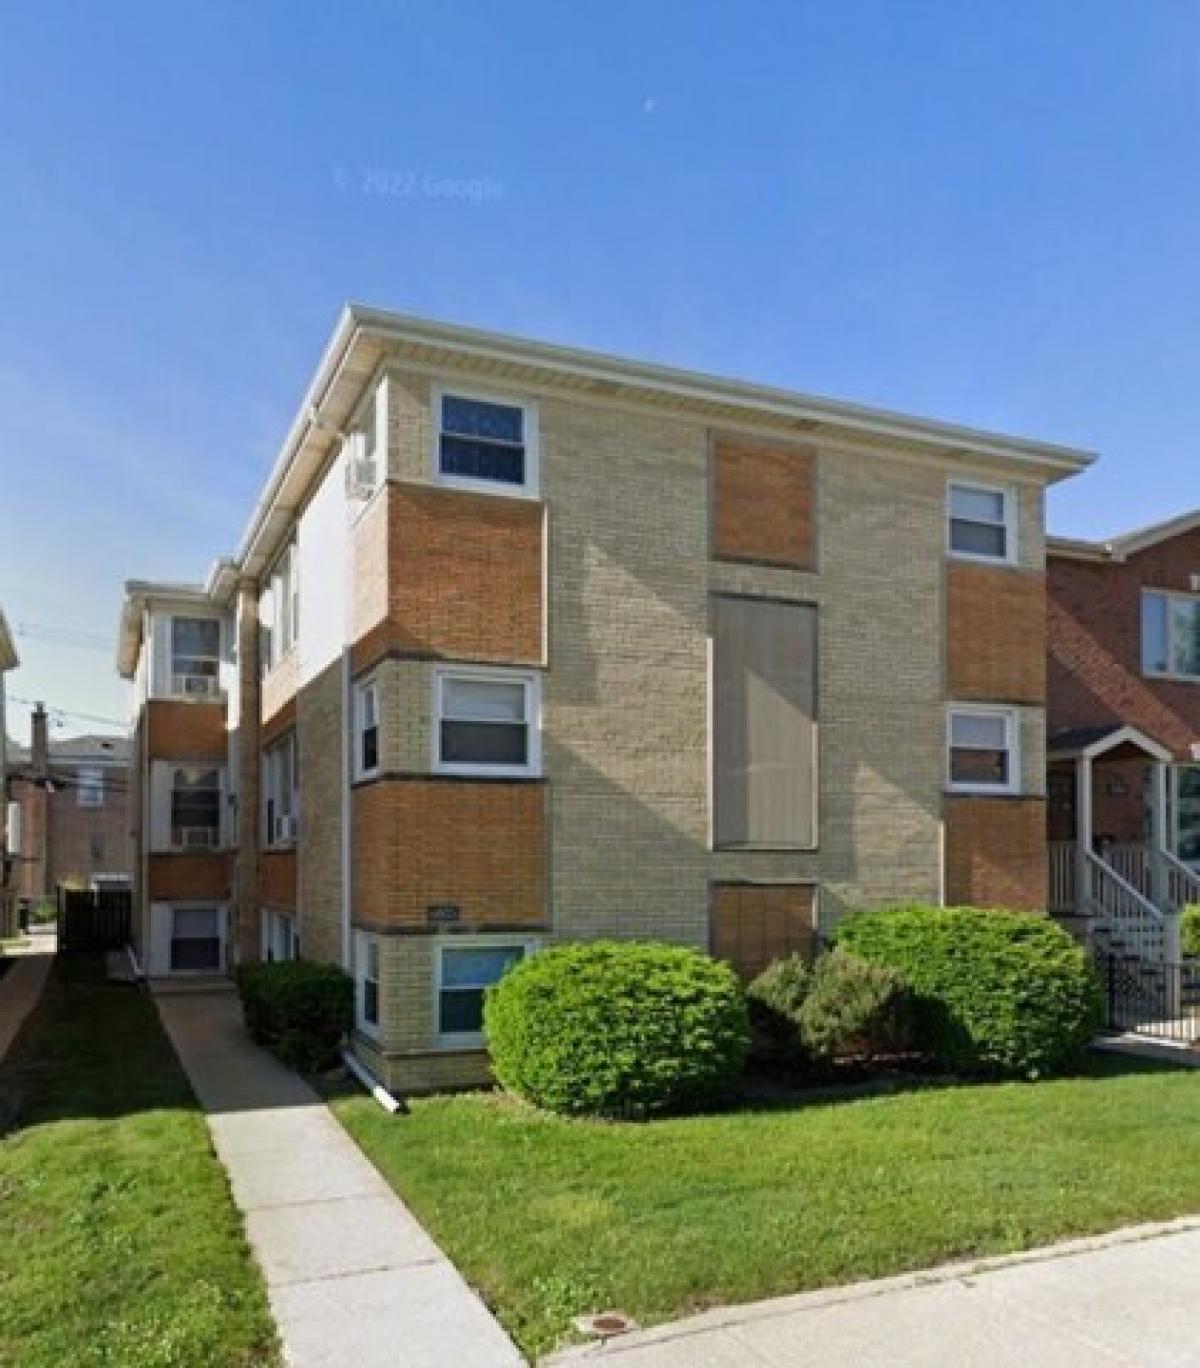 Picture of Apartment For Rent in Harwood Heights, Illinois, United States